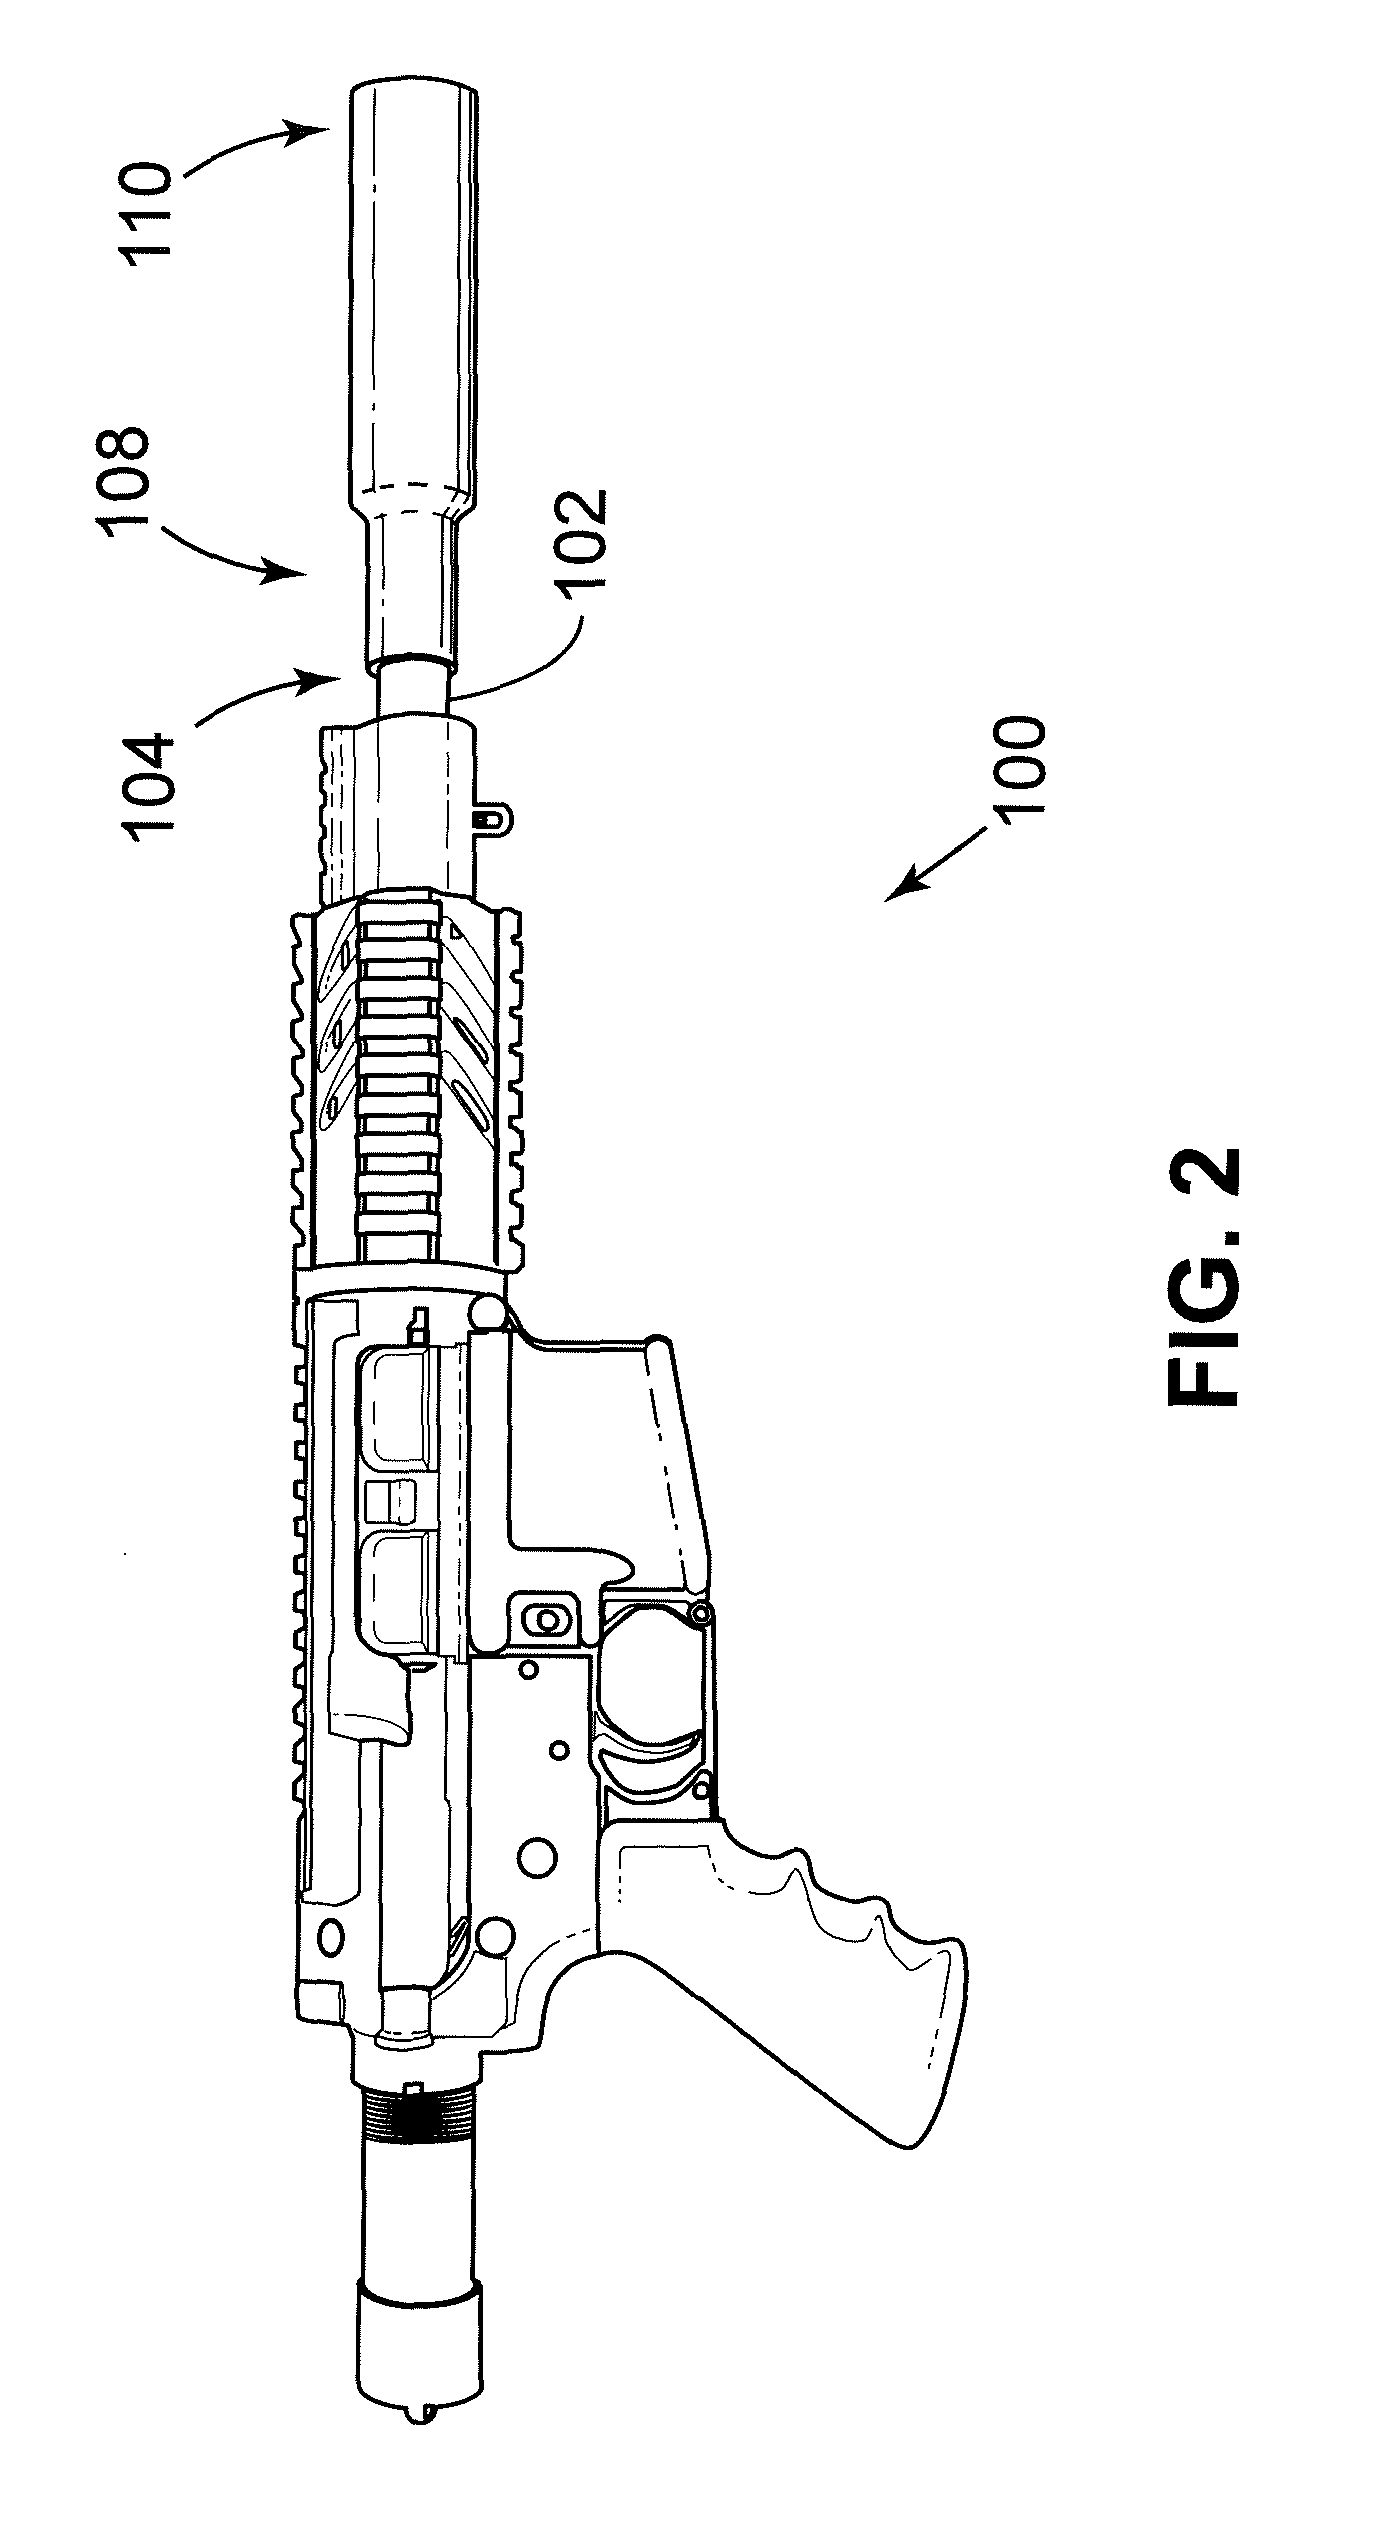 Suppressor for reducing the muzzle blast and flash of a firearm